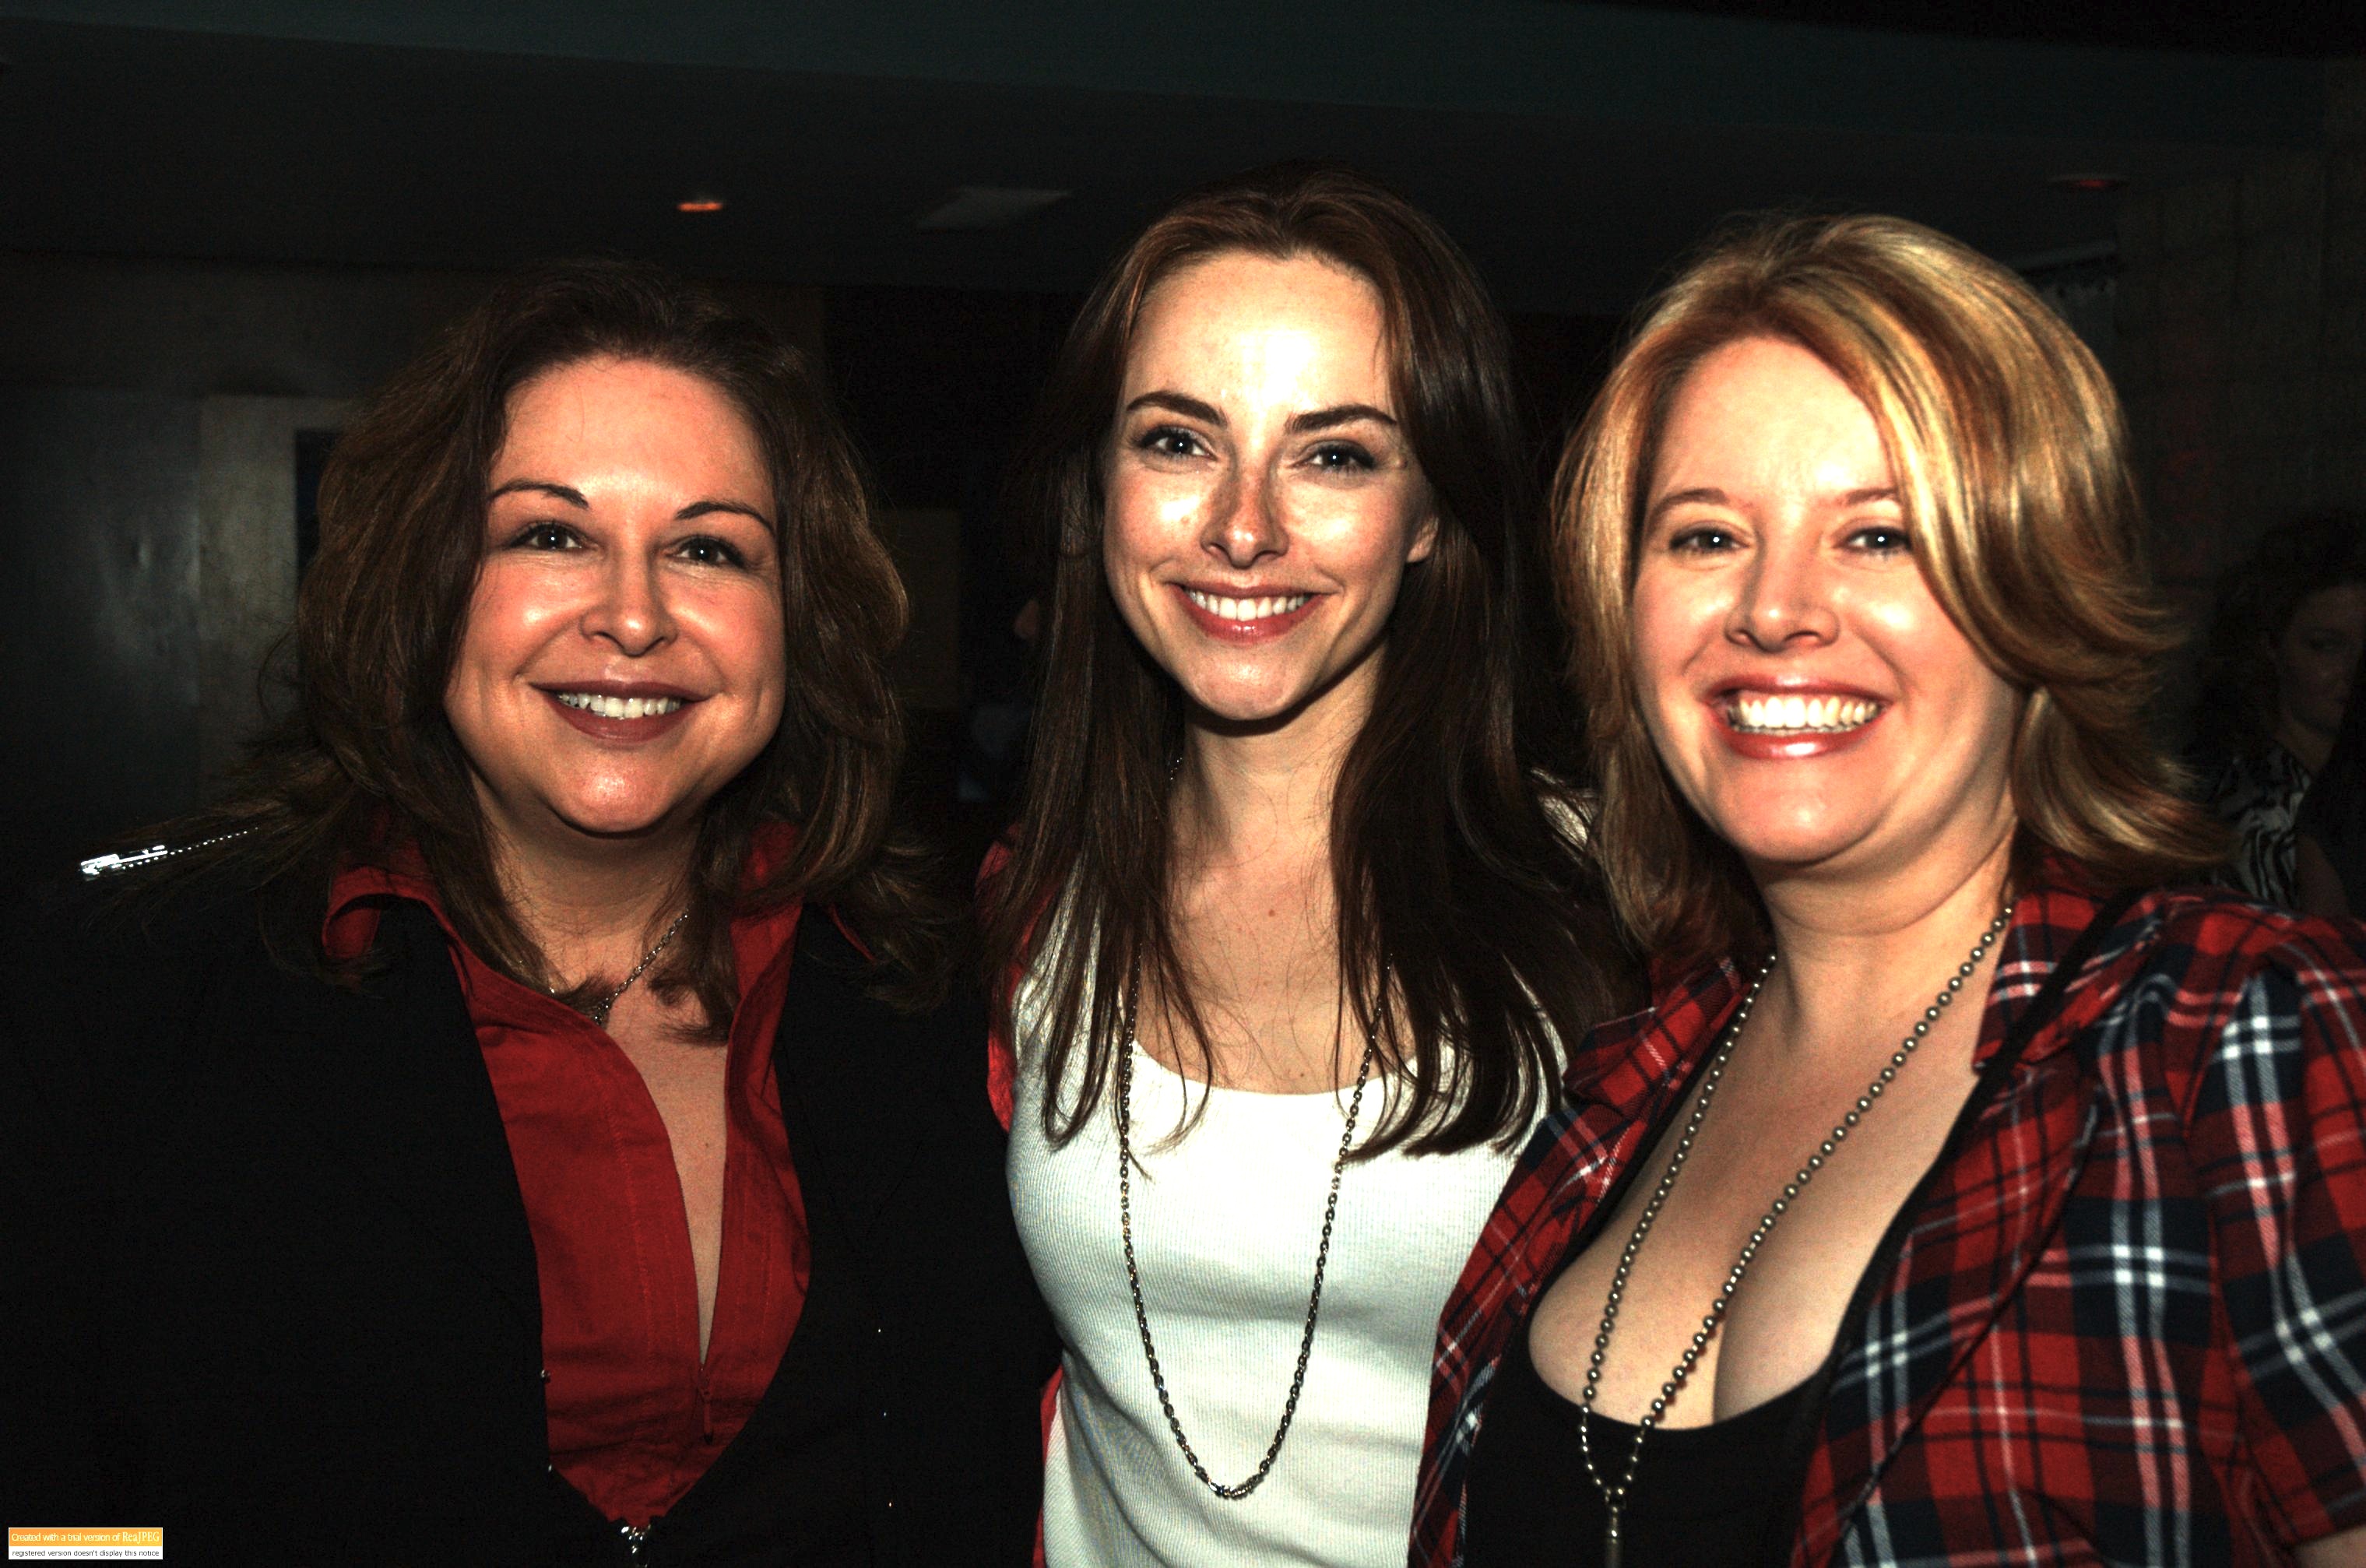 Jen Nikolaisen with the singers Nathalie and Marlee from Sugarbeach at the premiere party for 